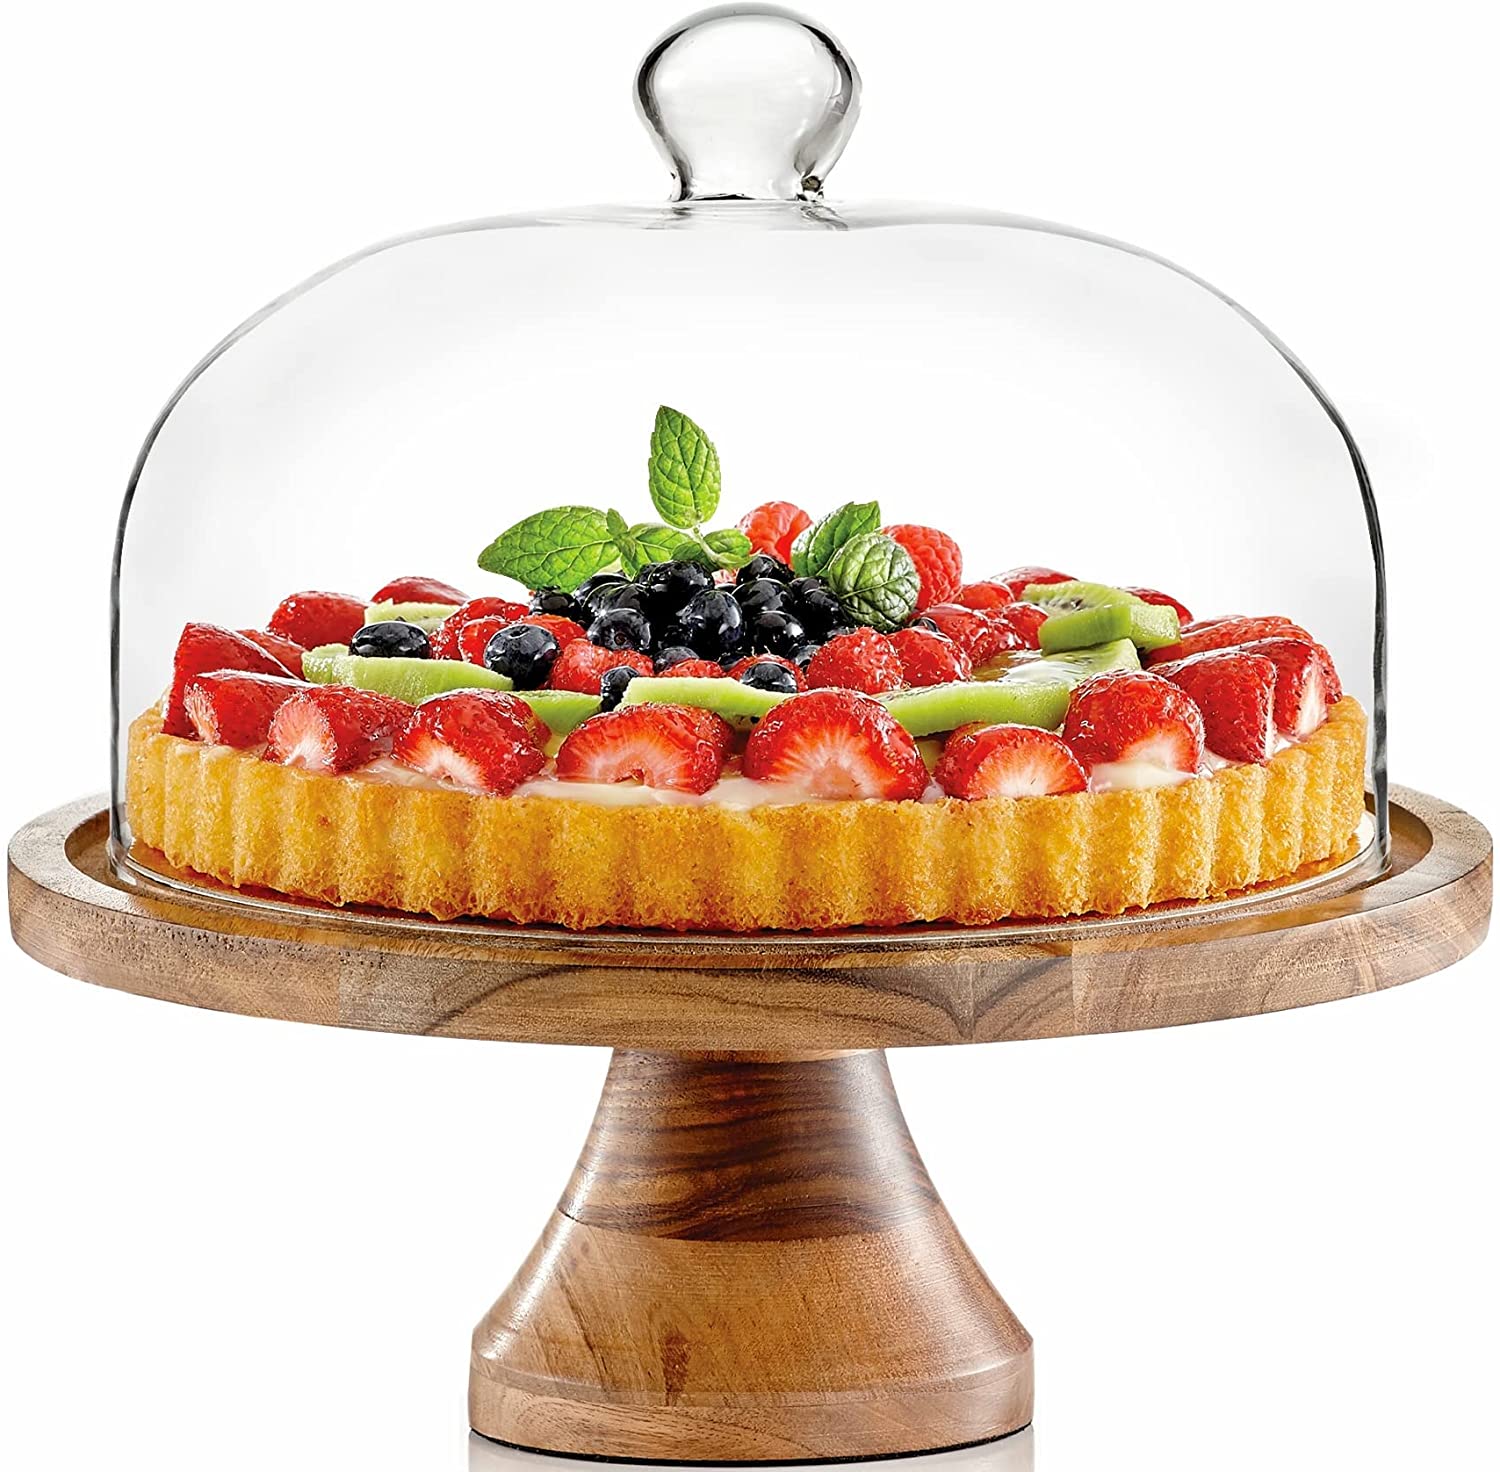 Wood cake tray with glass dome